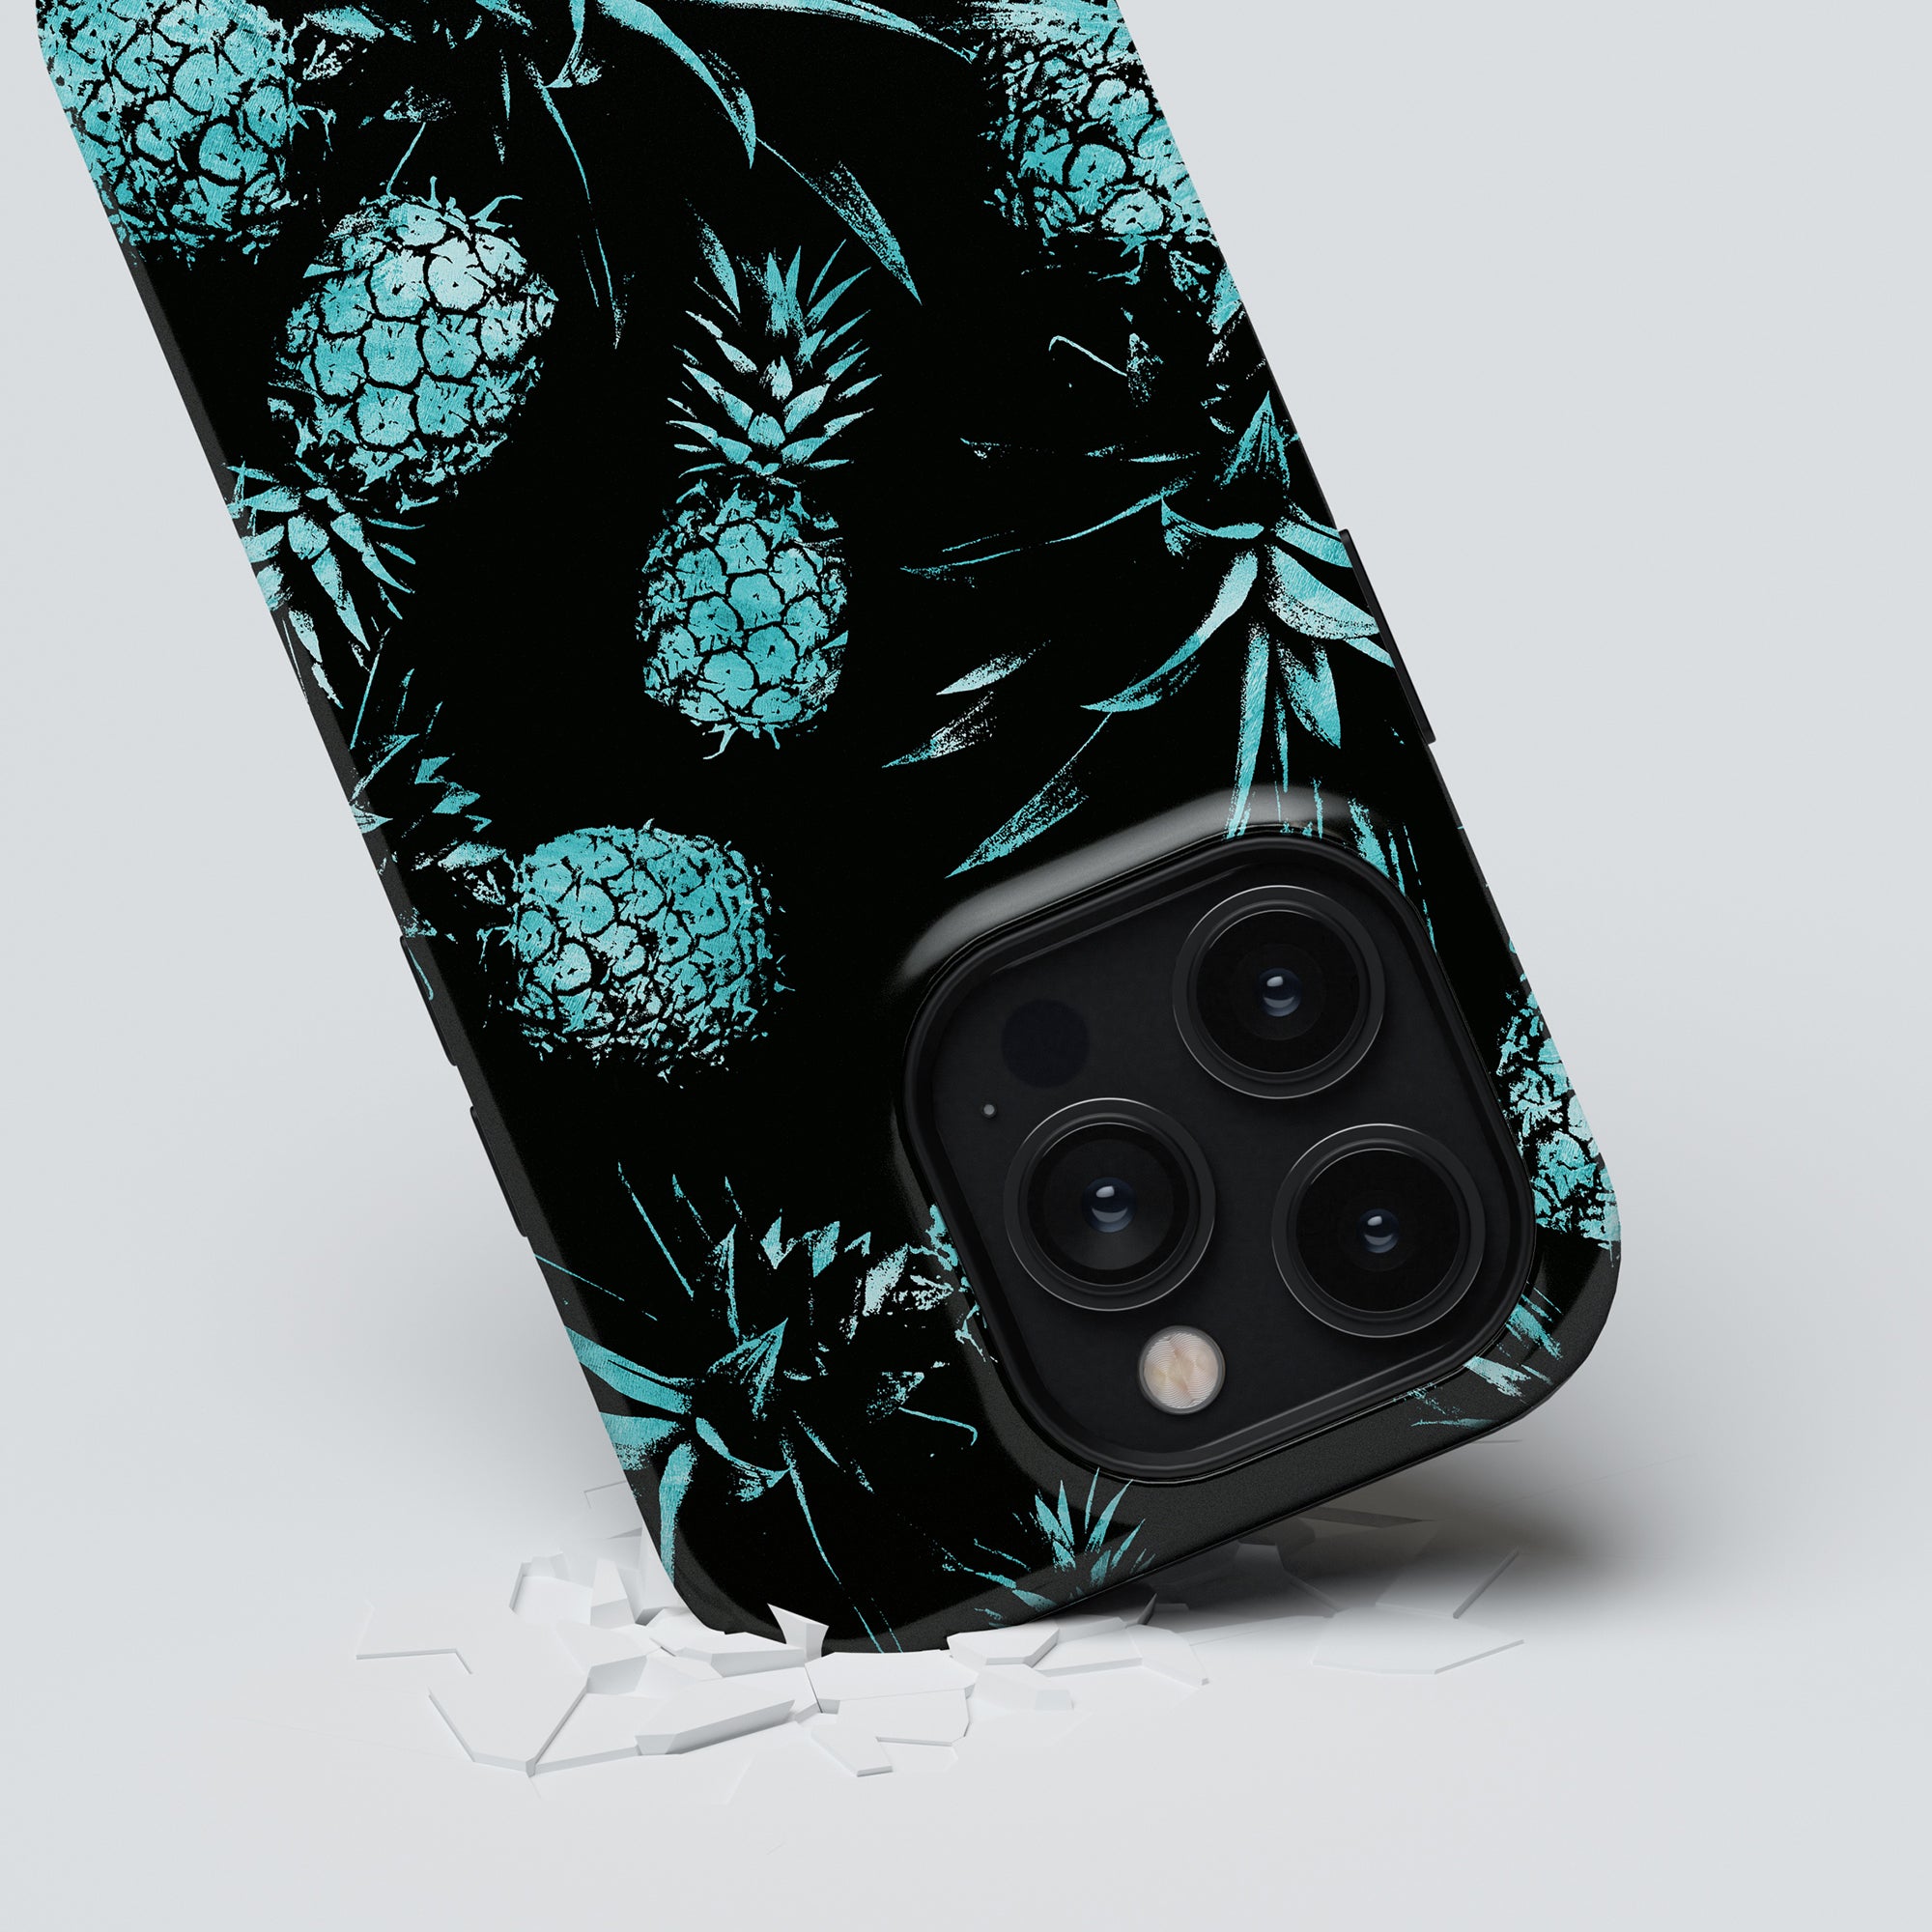 A smartphone with a Turquoise Pineapples - Tough Case from the Exotic Collection lies on a white surface with scattered shards of glass around it.